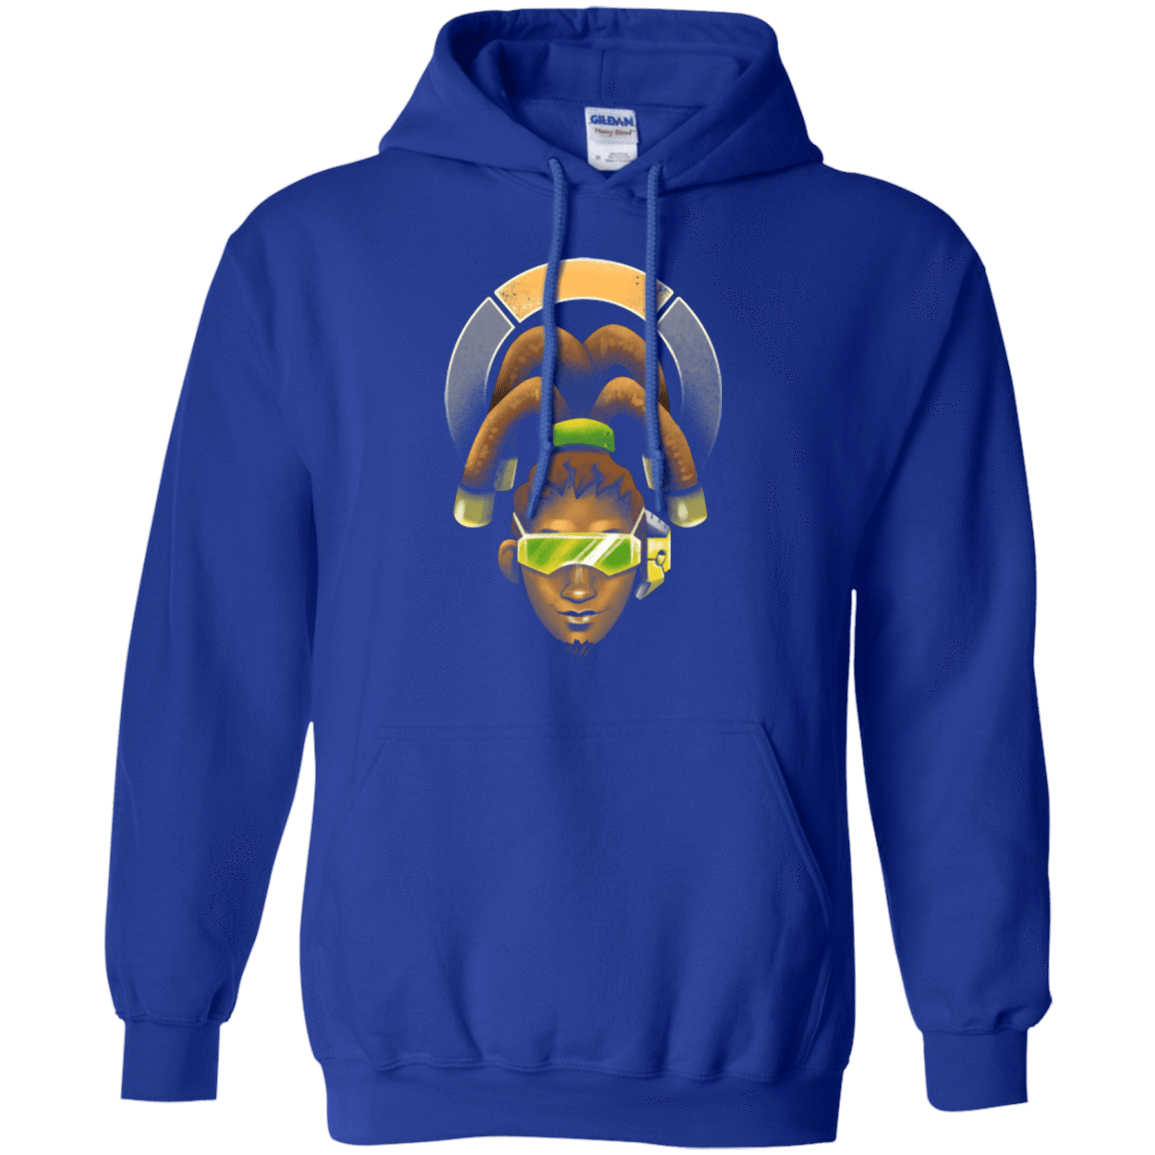 Sweatshirts Royal / Small The Celebrity Pullover Hoodie